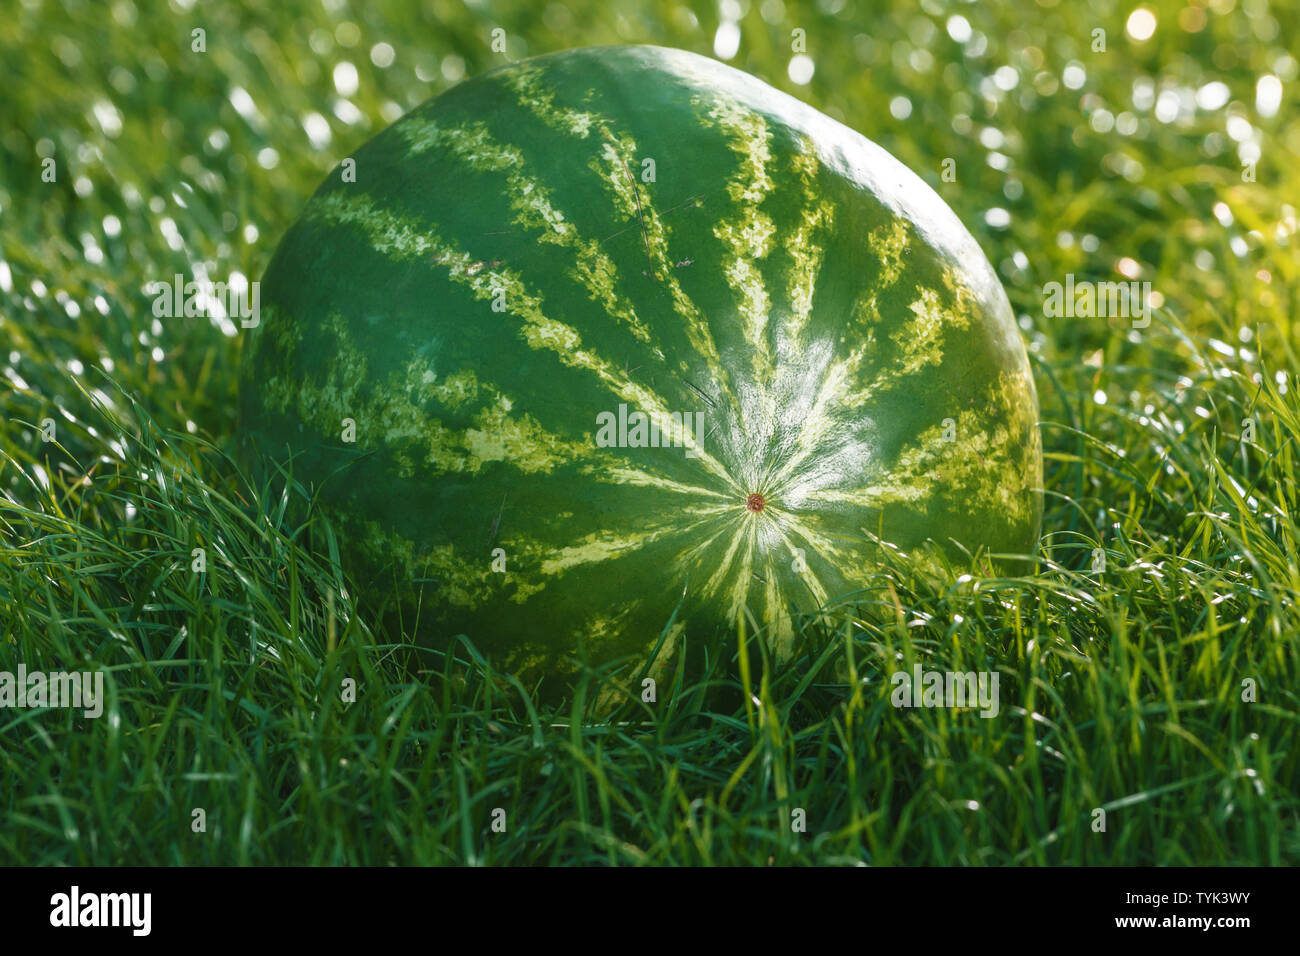 A whole watermelon lies on the green grass. Stock Photo